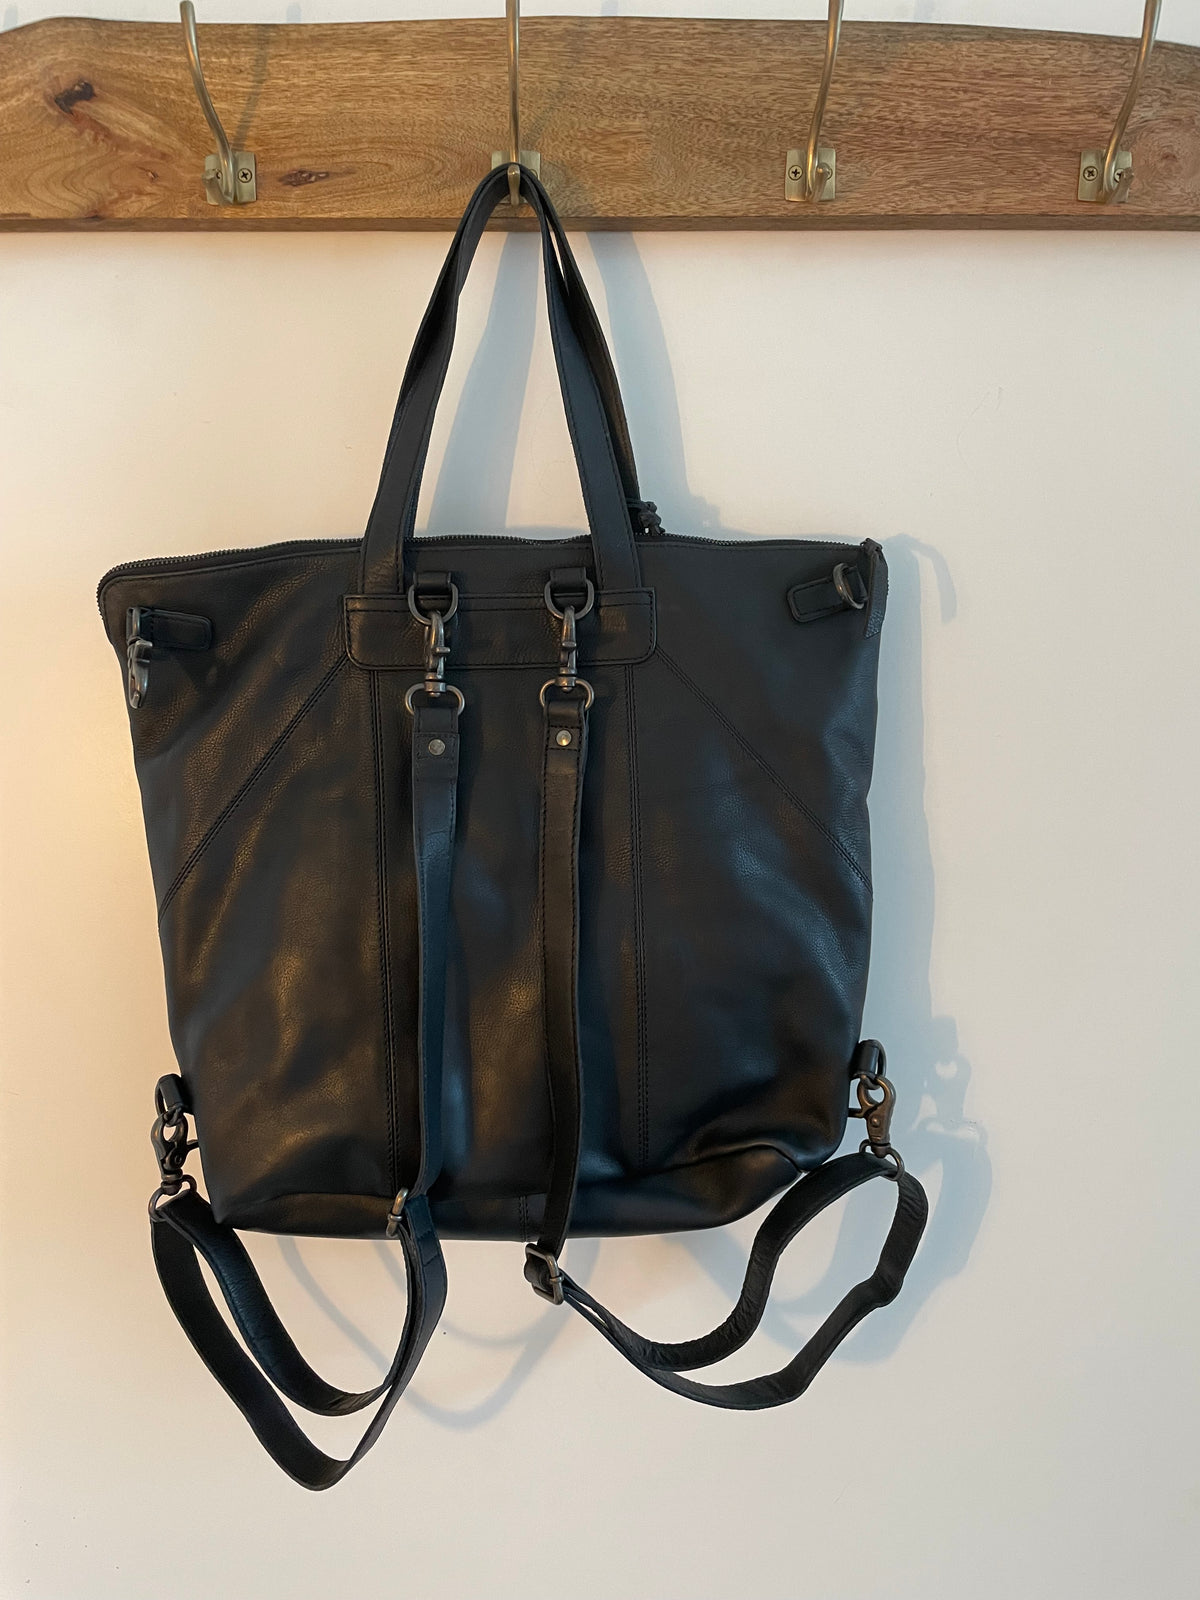 Hastings Convertible Tote/ Backpack Black Leather